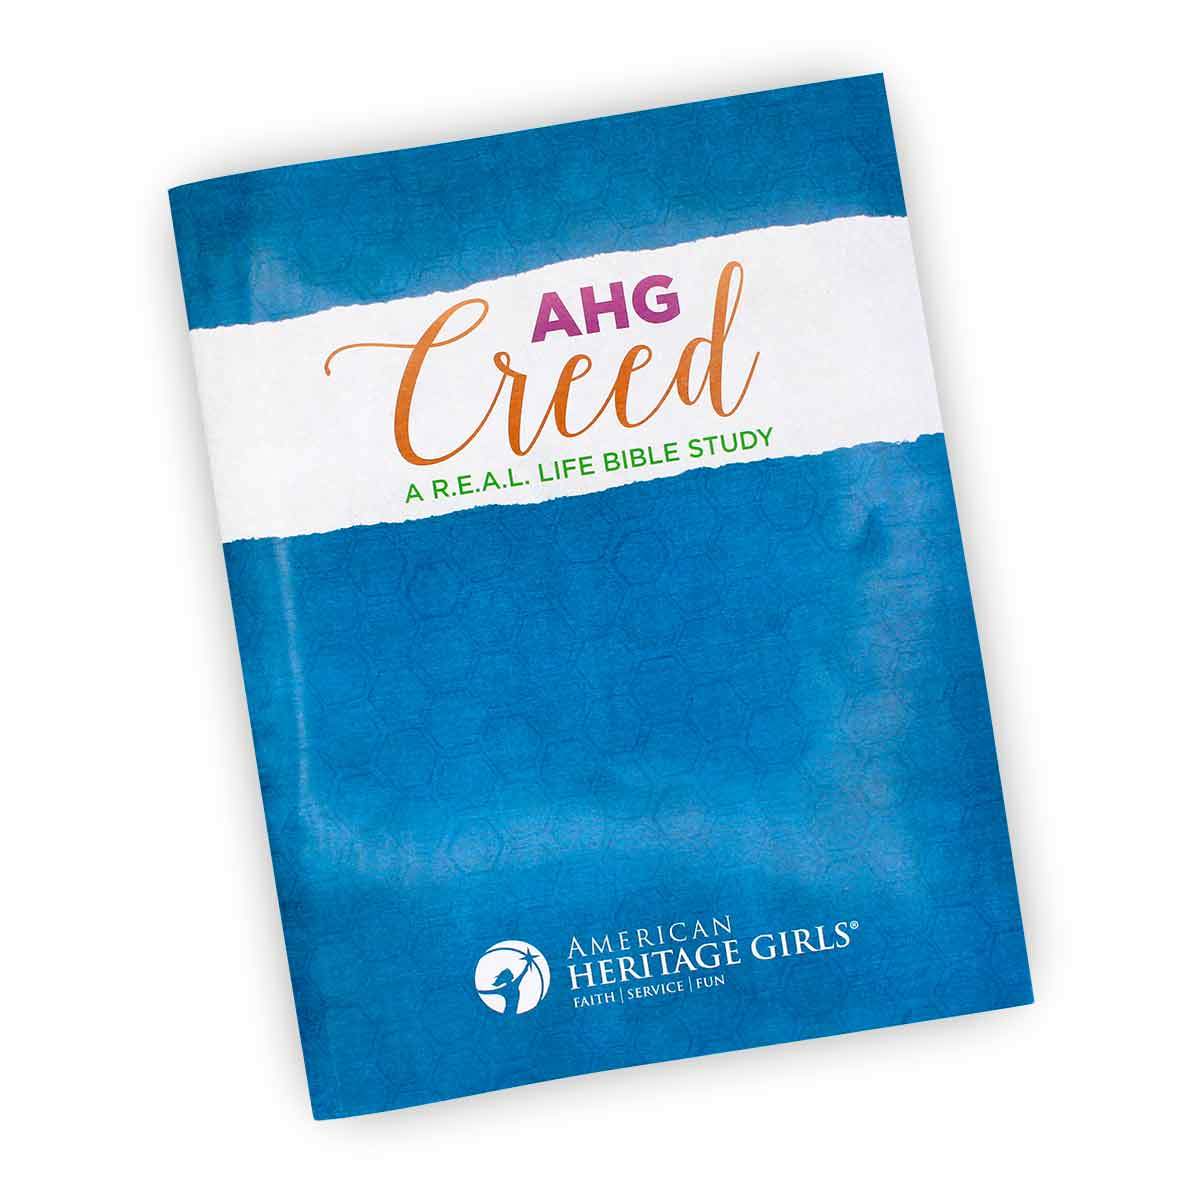 AHG Creed: A R.E.A.L. Life Bible Study Extension Pack - Download